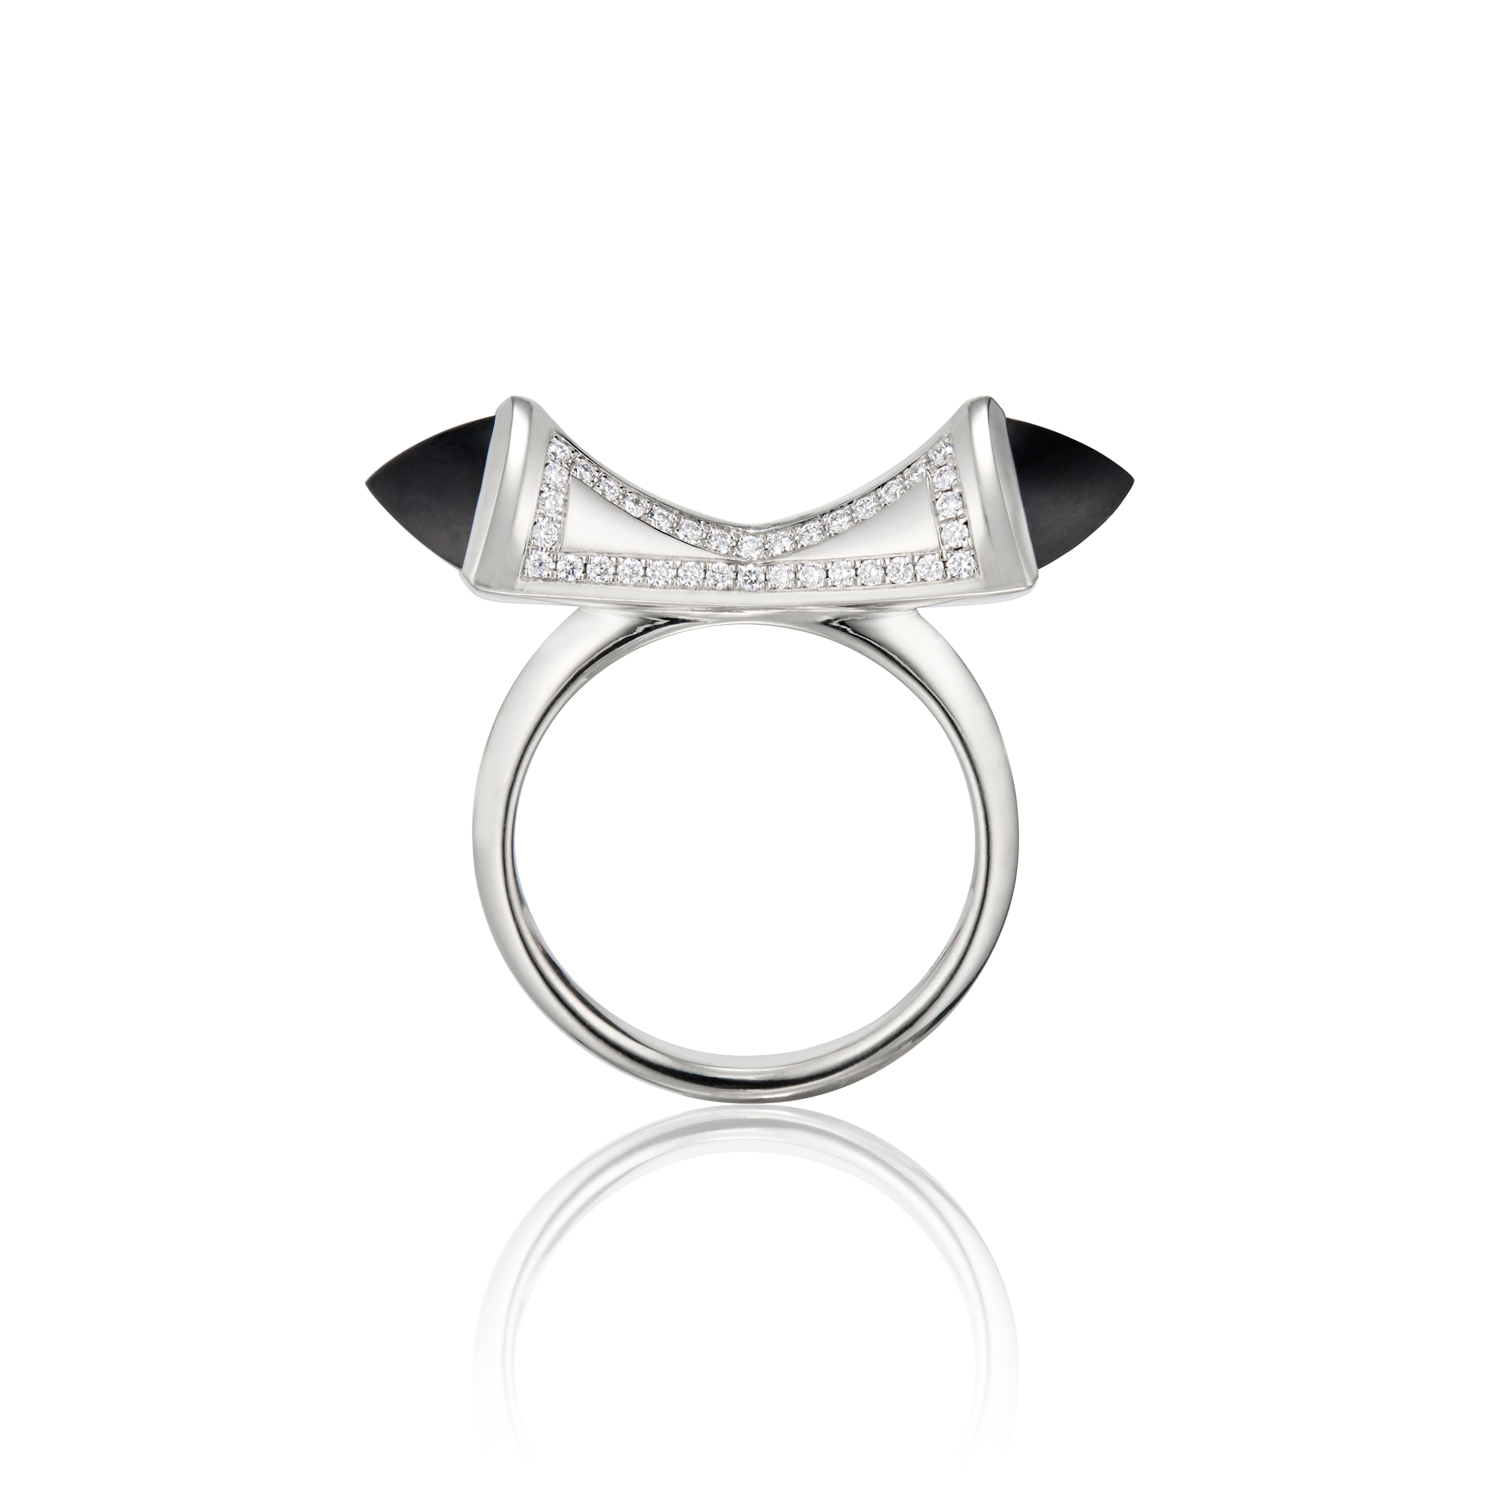 This is a front facing photo of the Renisis Black Jade Temple Bow Ring. It features18K white gold with black jade and diamond patterns. The sharply cut jade stones are set on opposite ends of the rings concave center.